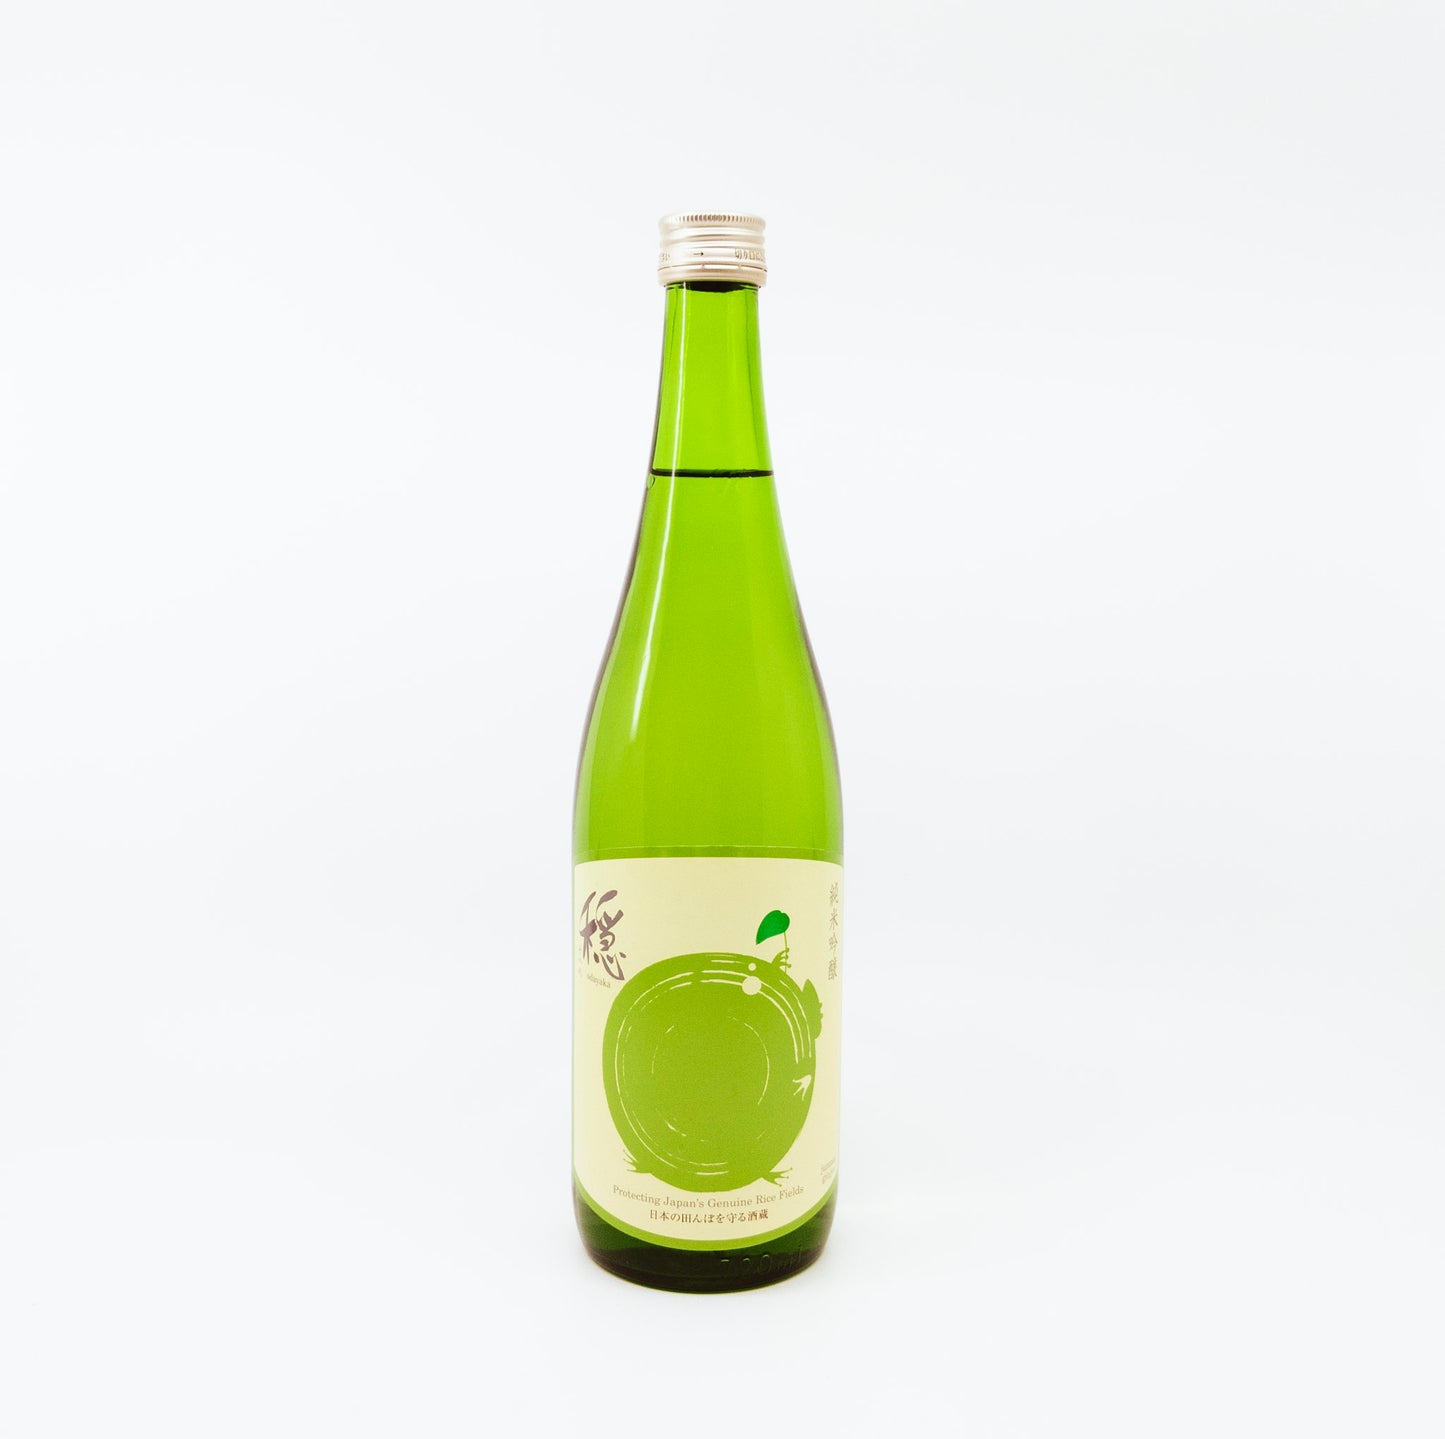 green bottle with green circle on label